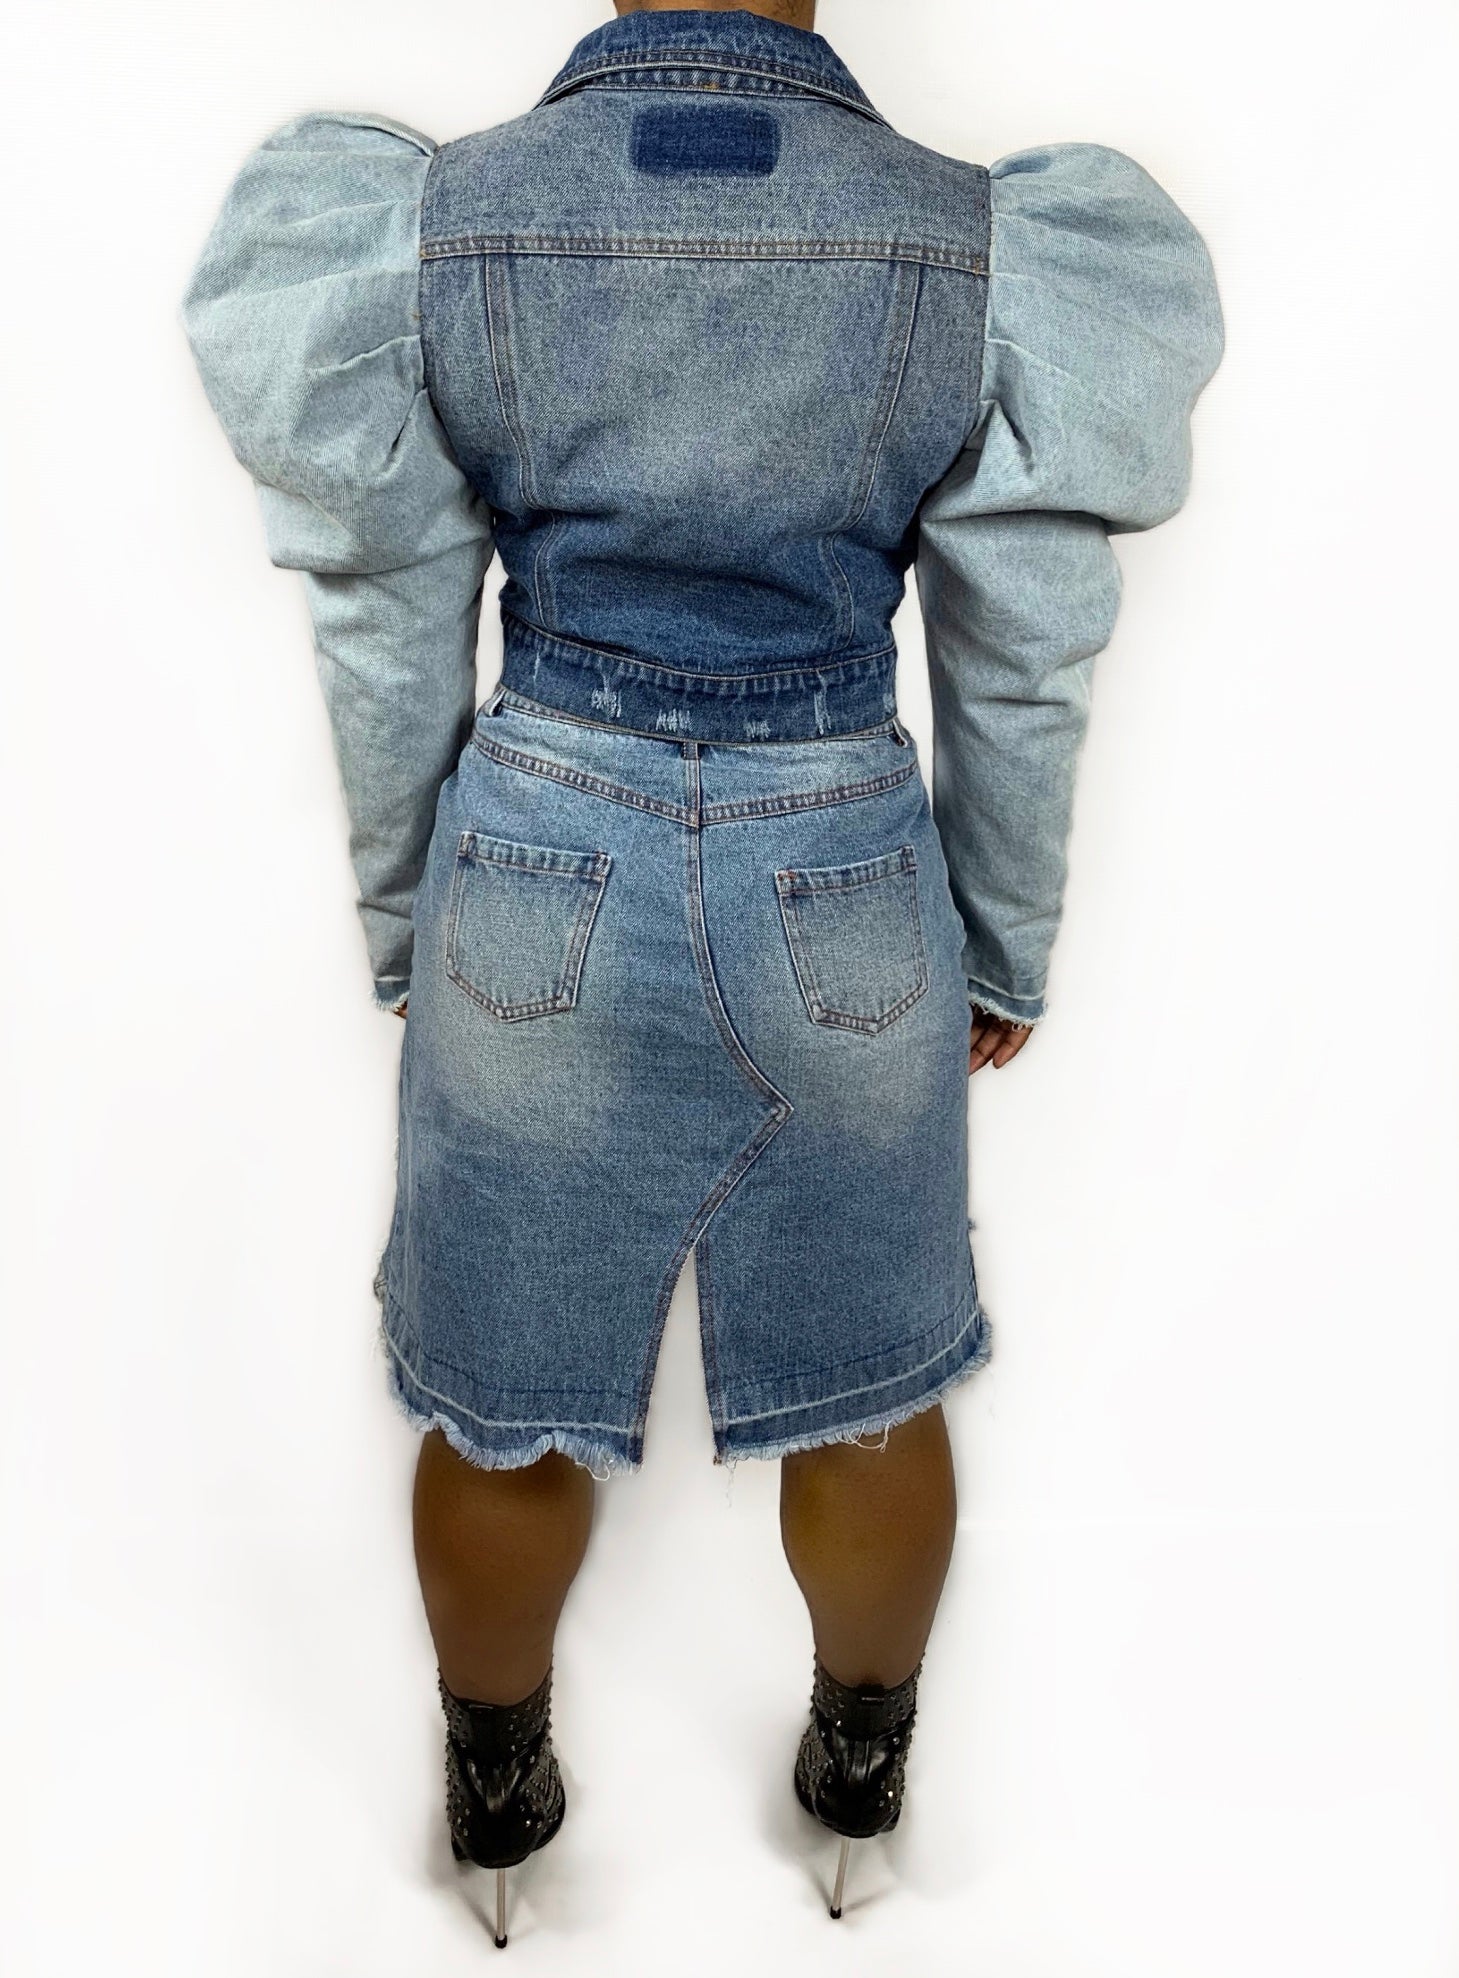 GoldxTeal distressed denim mini skirt. Statement making denim skirt with raw edges, high front and low back, asymmetrical cut.